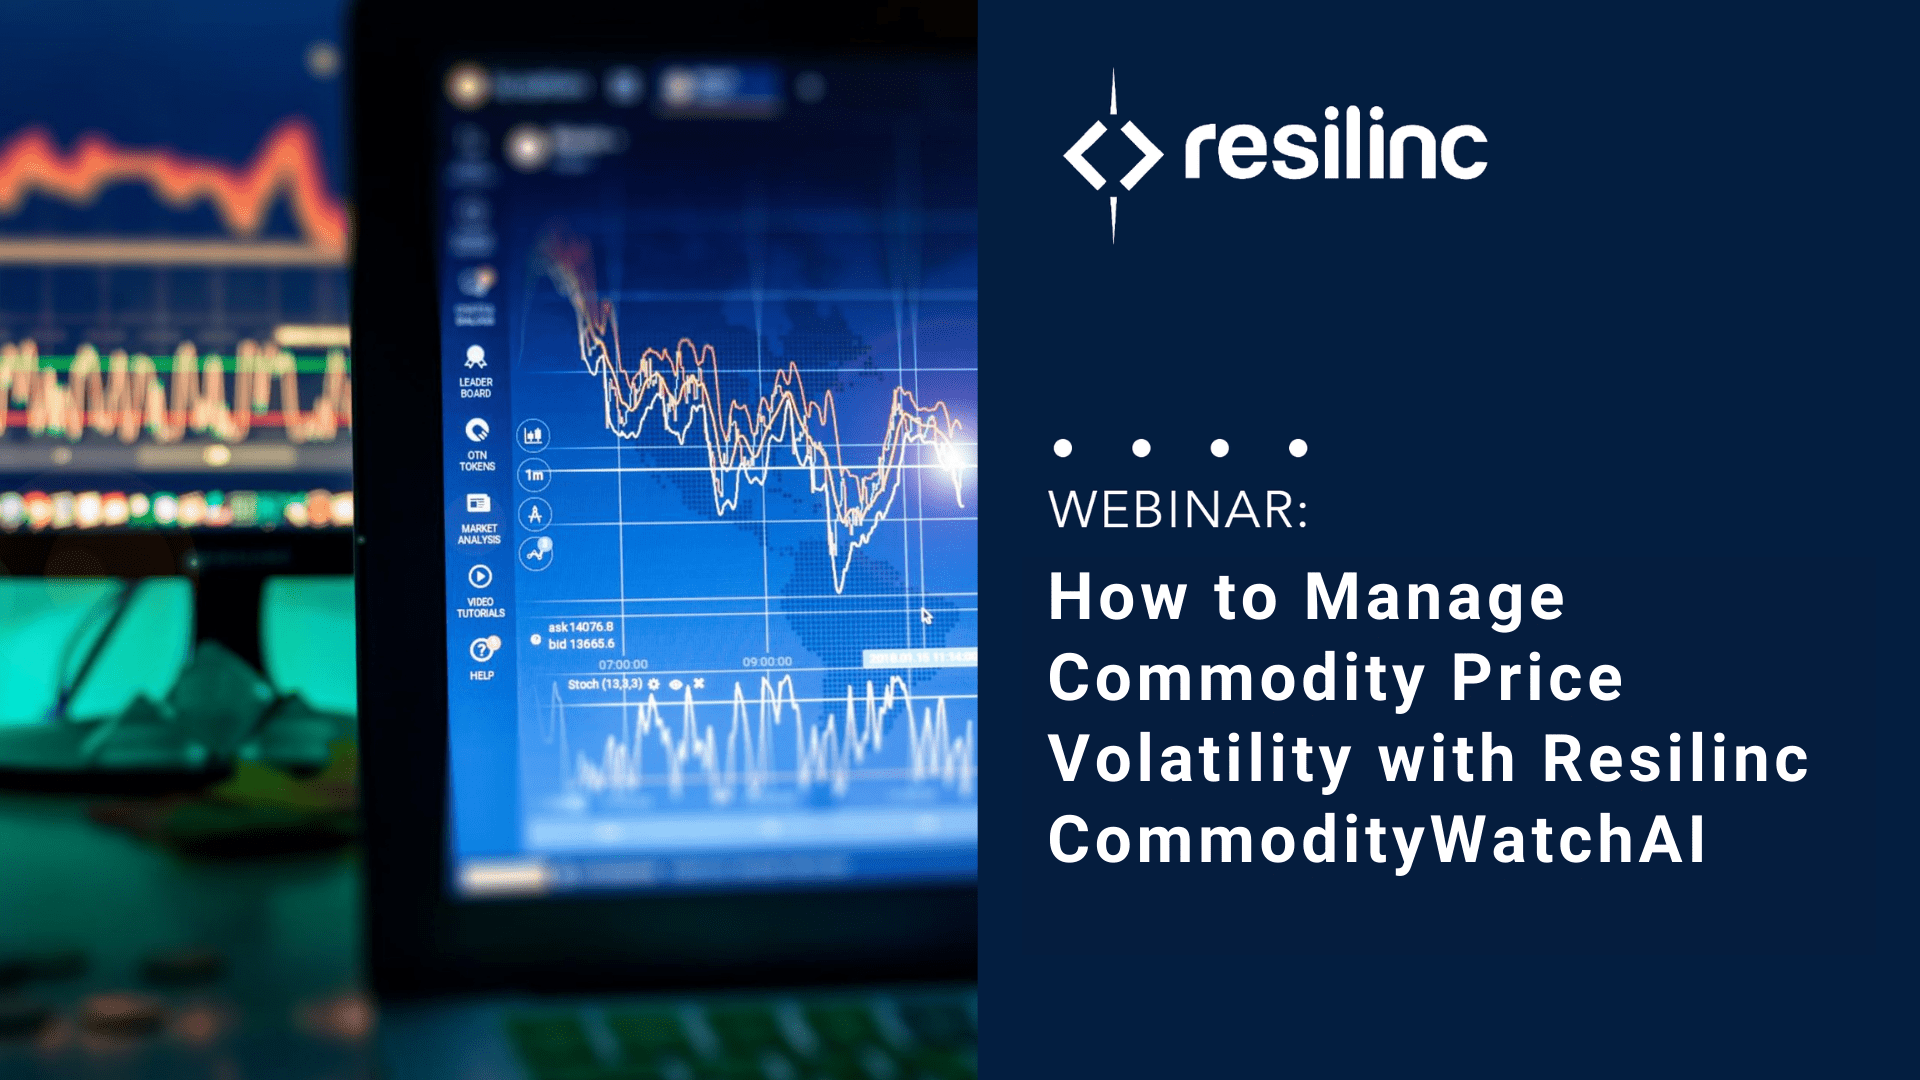 You are currently viewing Webinar: How to Manage Commodity Price Volatility with Resilinc CommodityWatchAI